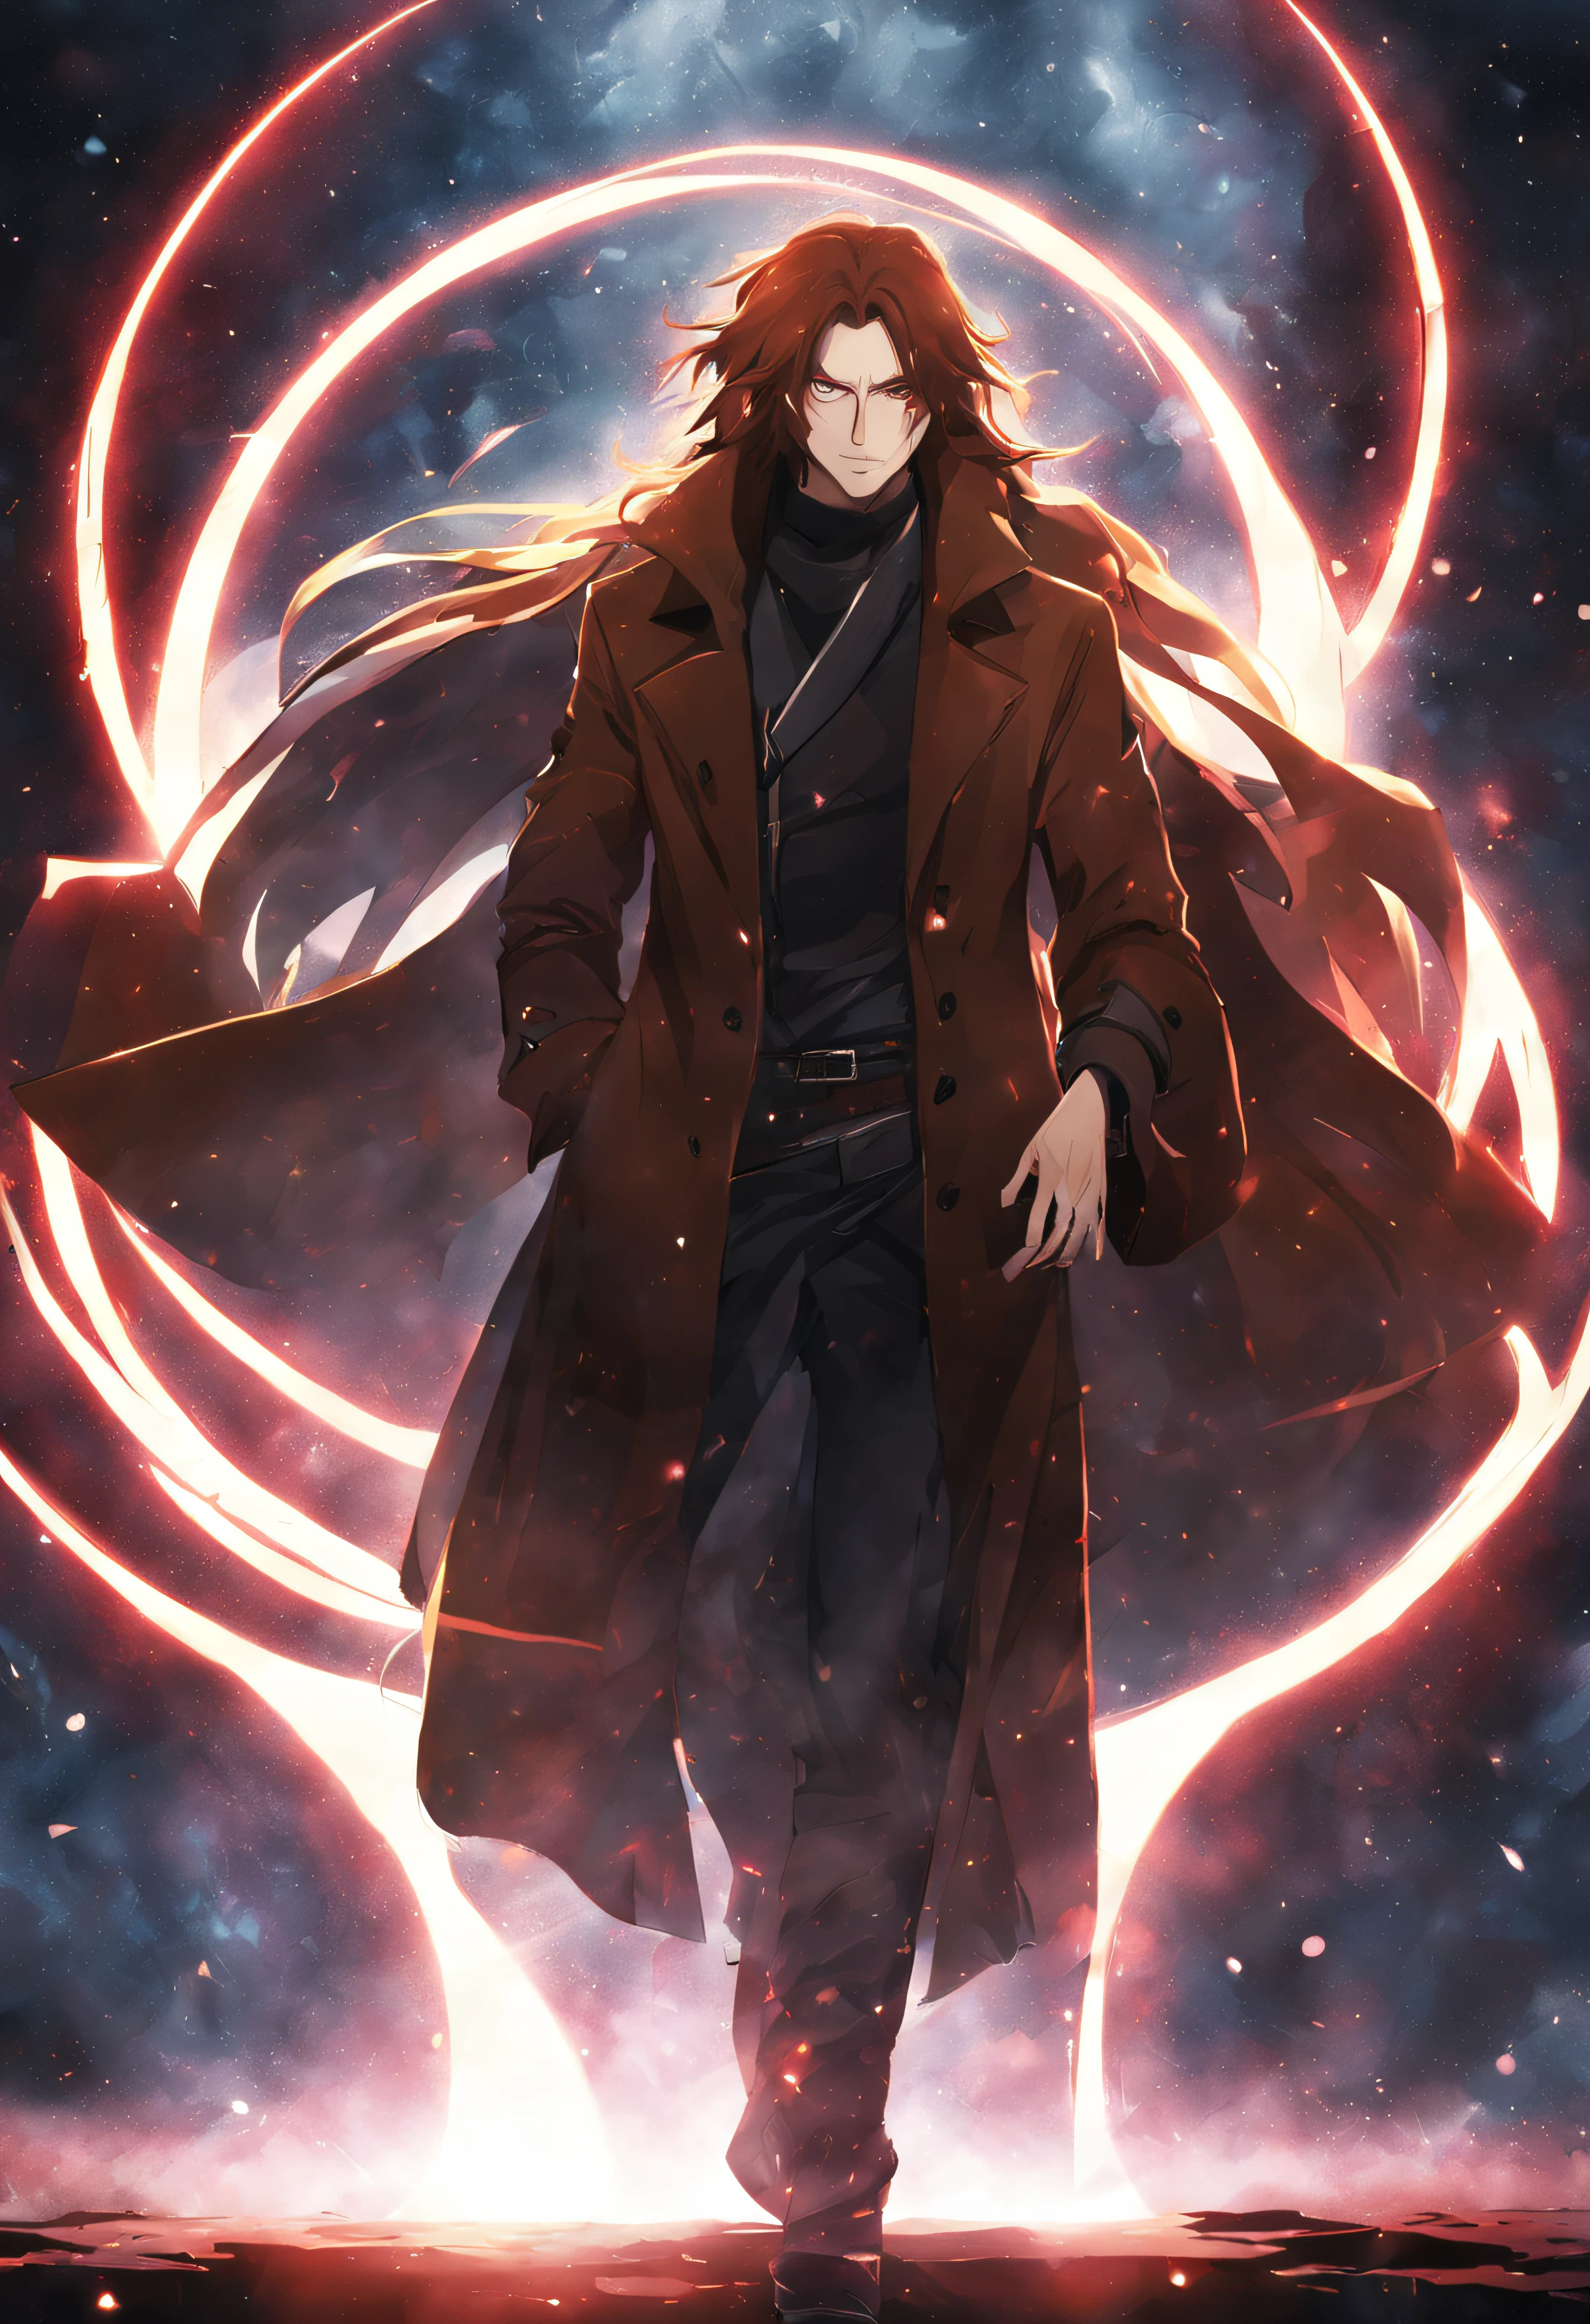 one man, red long hairs,pale withe skin, wearing a leather brown overcoat, magic aura particles, red eyes, 4k, cinematic details, anime 2D style